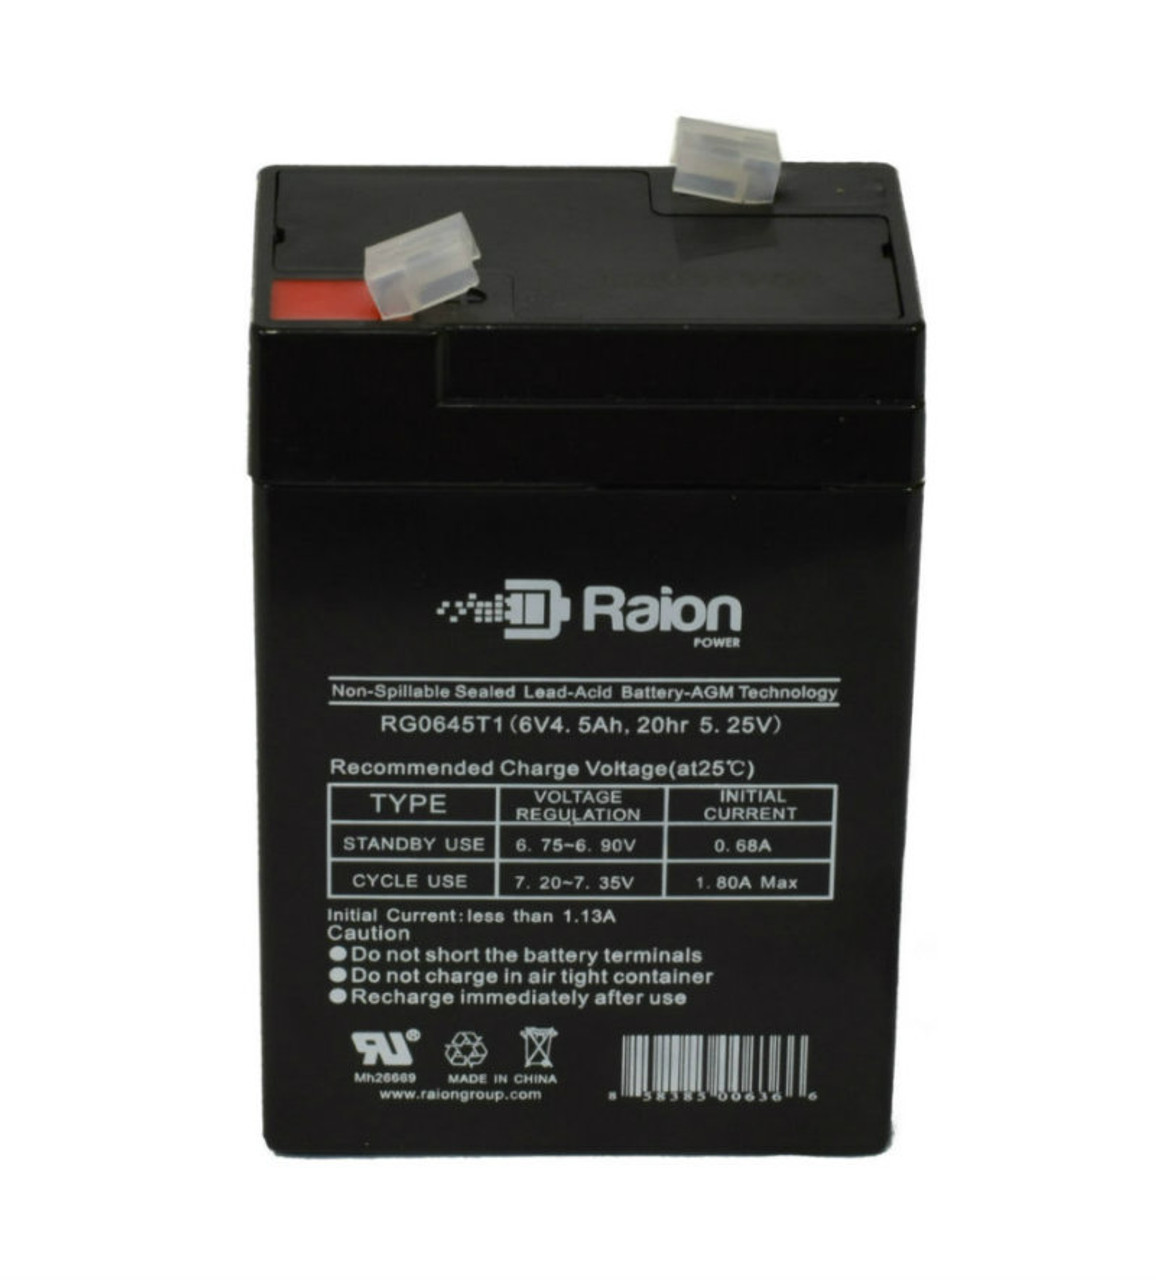 Raion Power RG0645T1 Replacement Battery Cartridge for Safety SN640